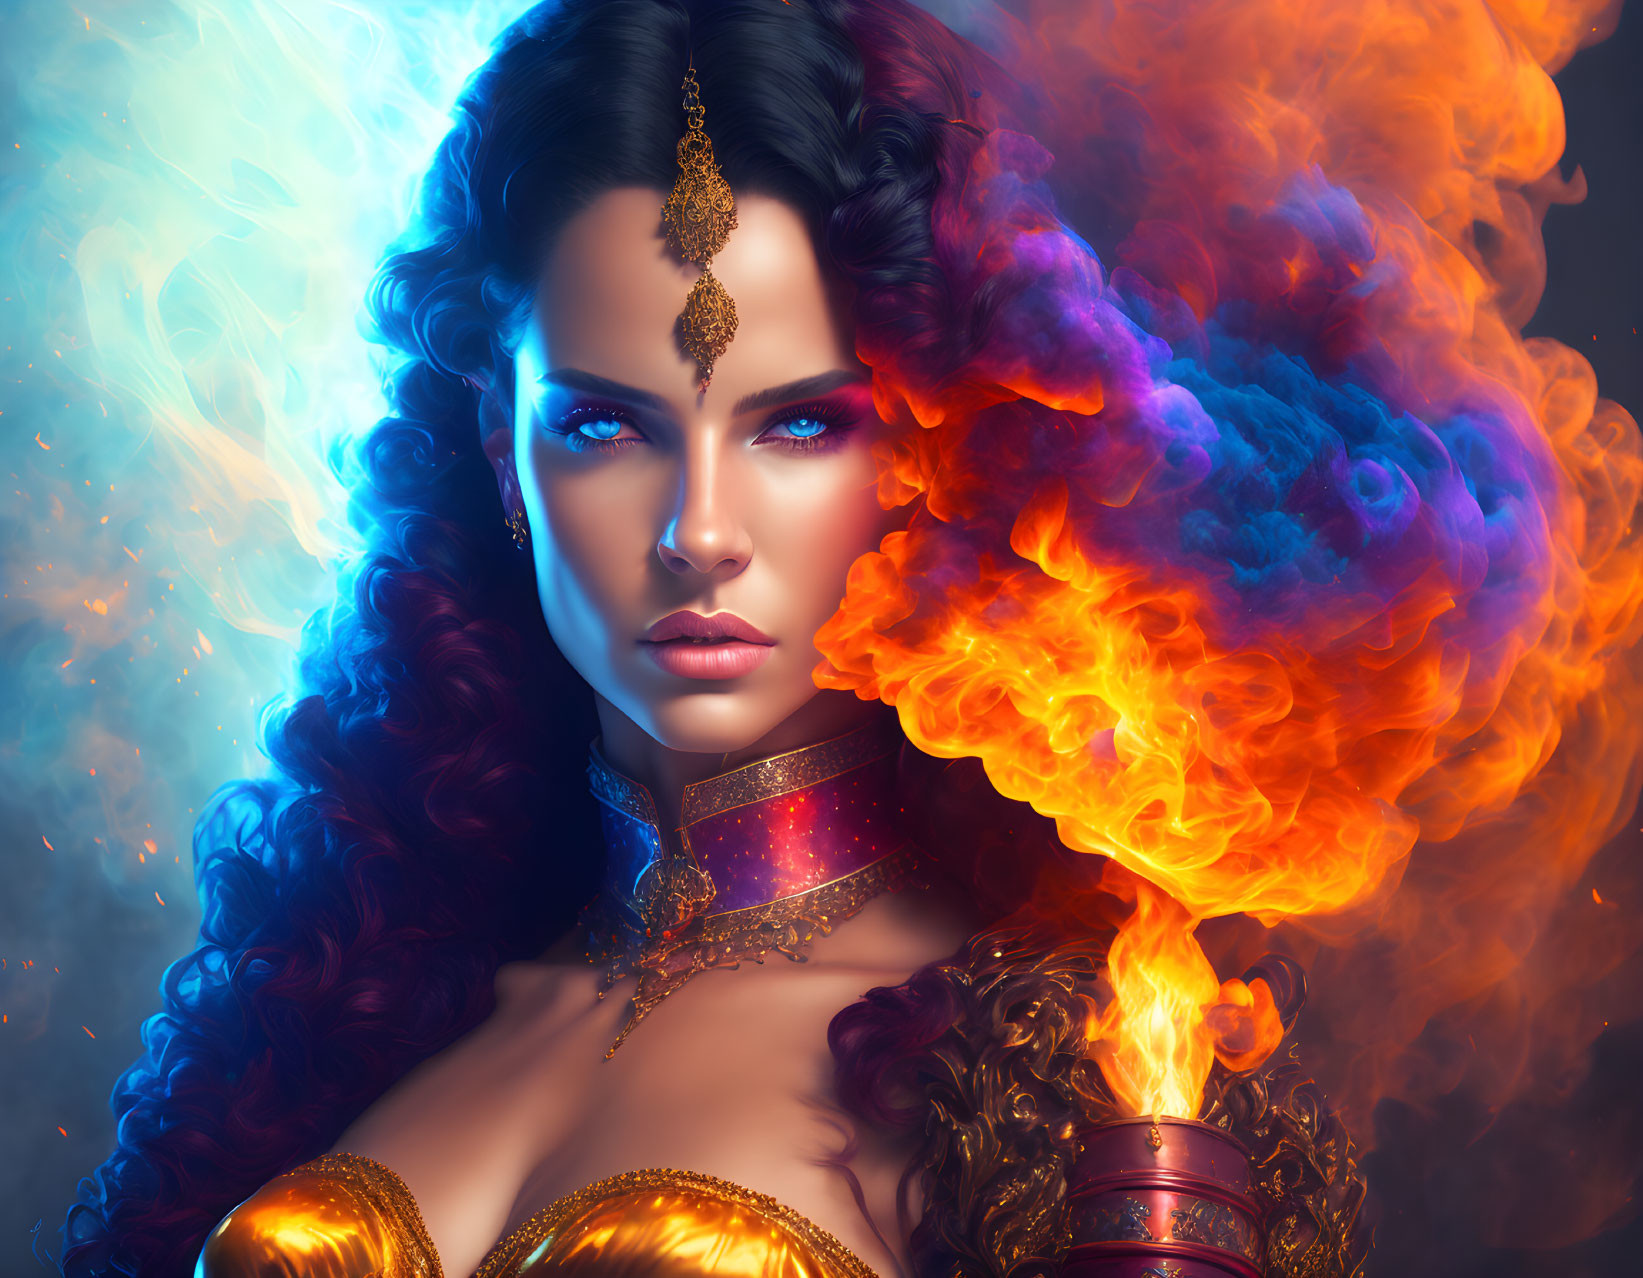 Digital artwork featuring woman in fiery orange and cool blue with intense gaze amidst swirling flames and mist